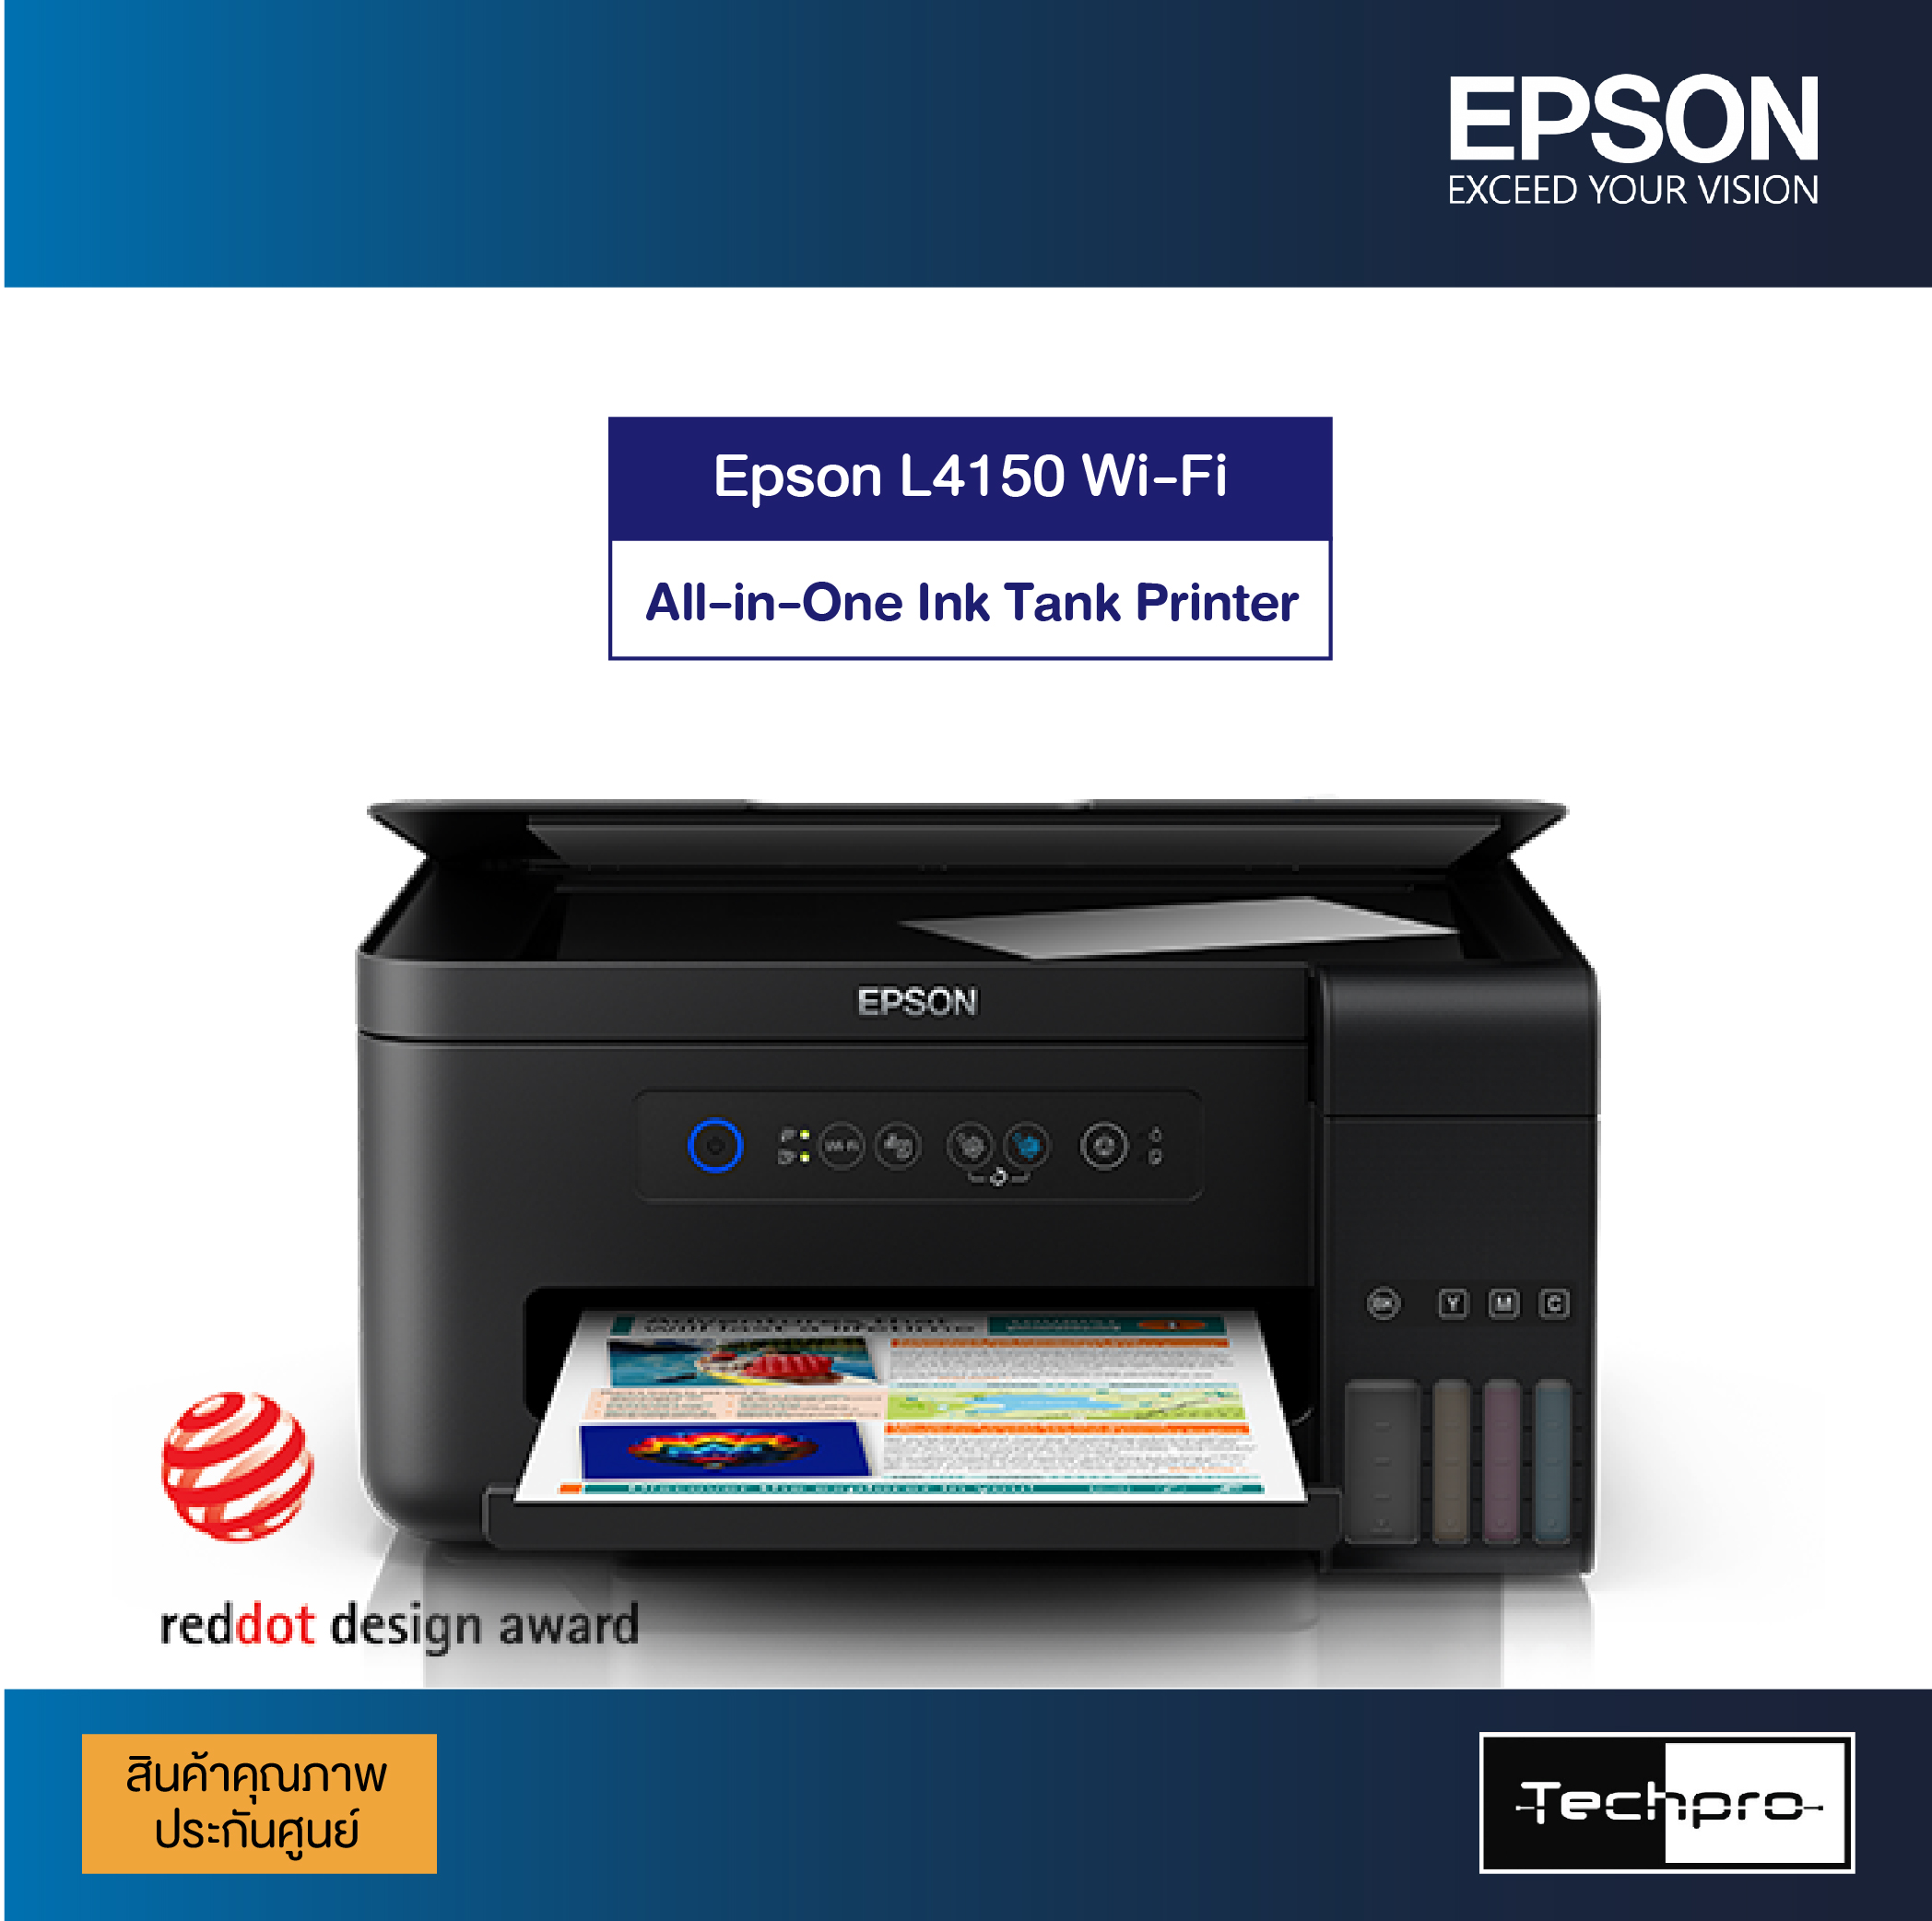 Epson L4150 Wi Fi All In One Ink Tank Printer Techpro 4234